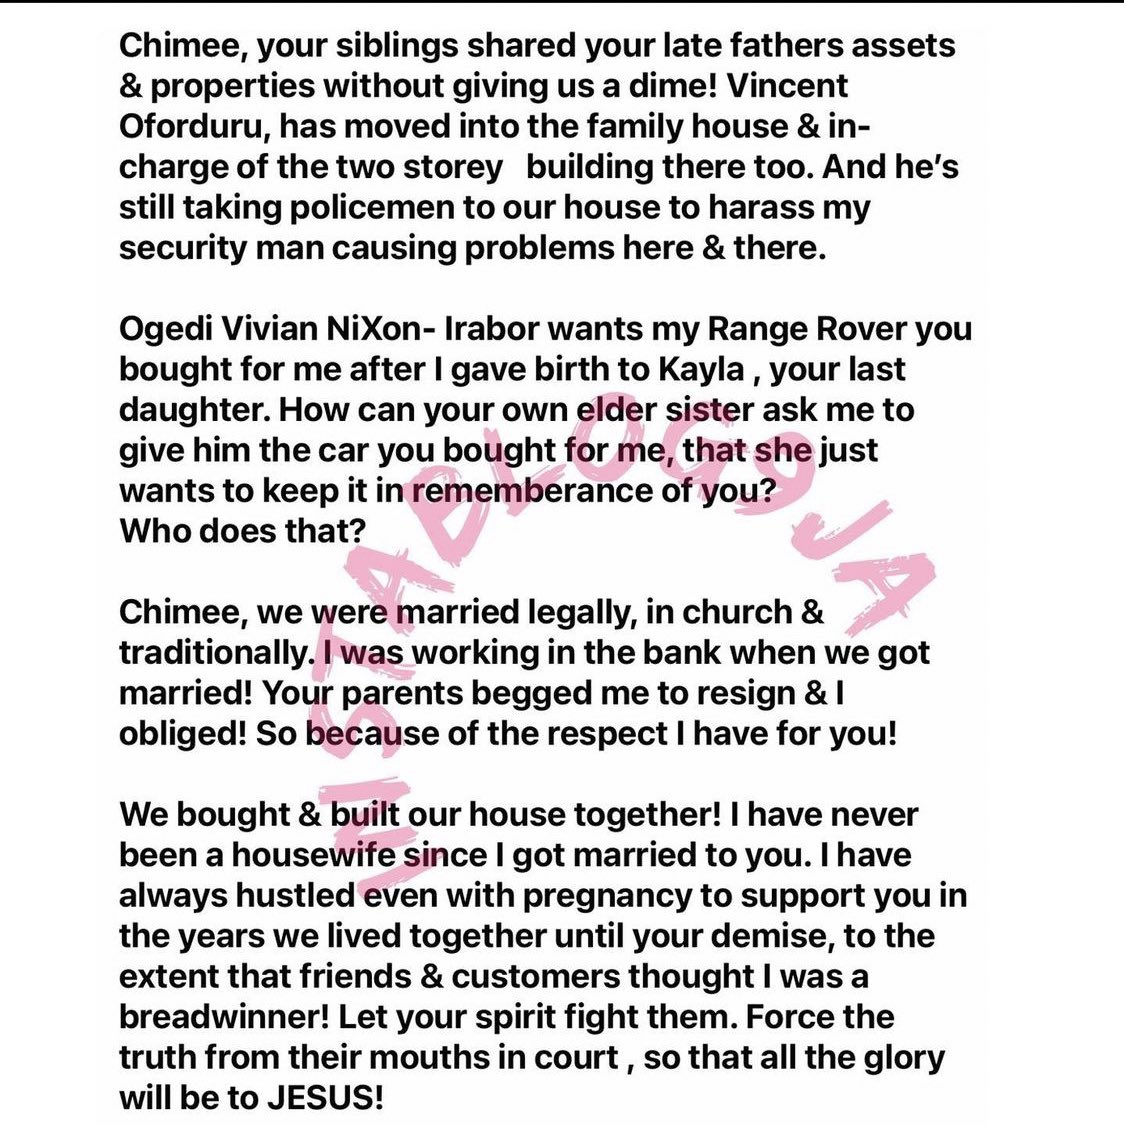 Lady narrates her sad experiences with her late husband’s family.